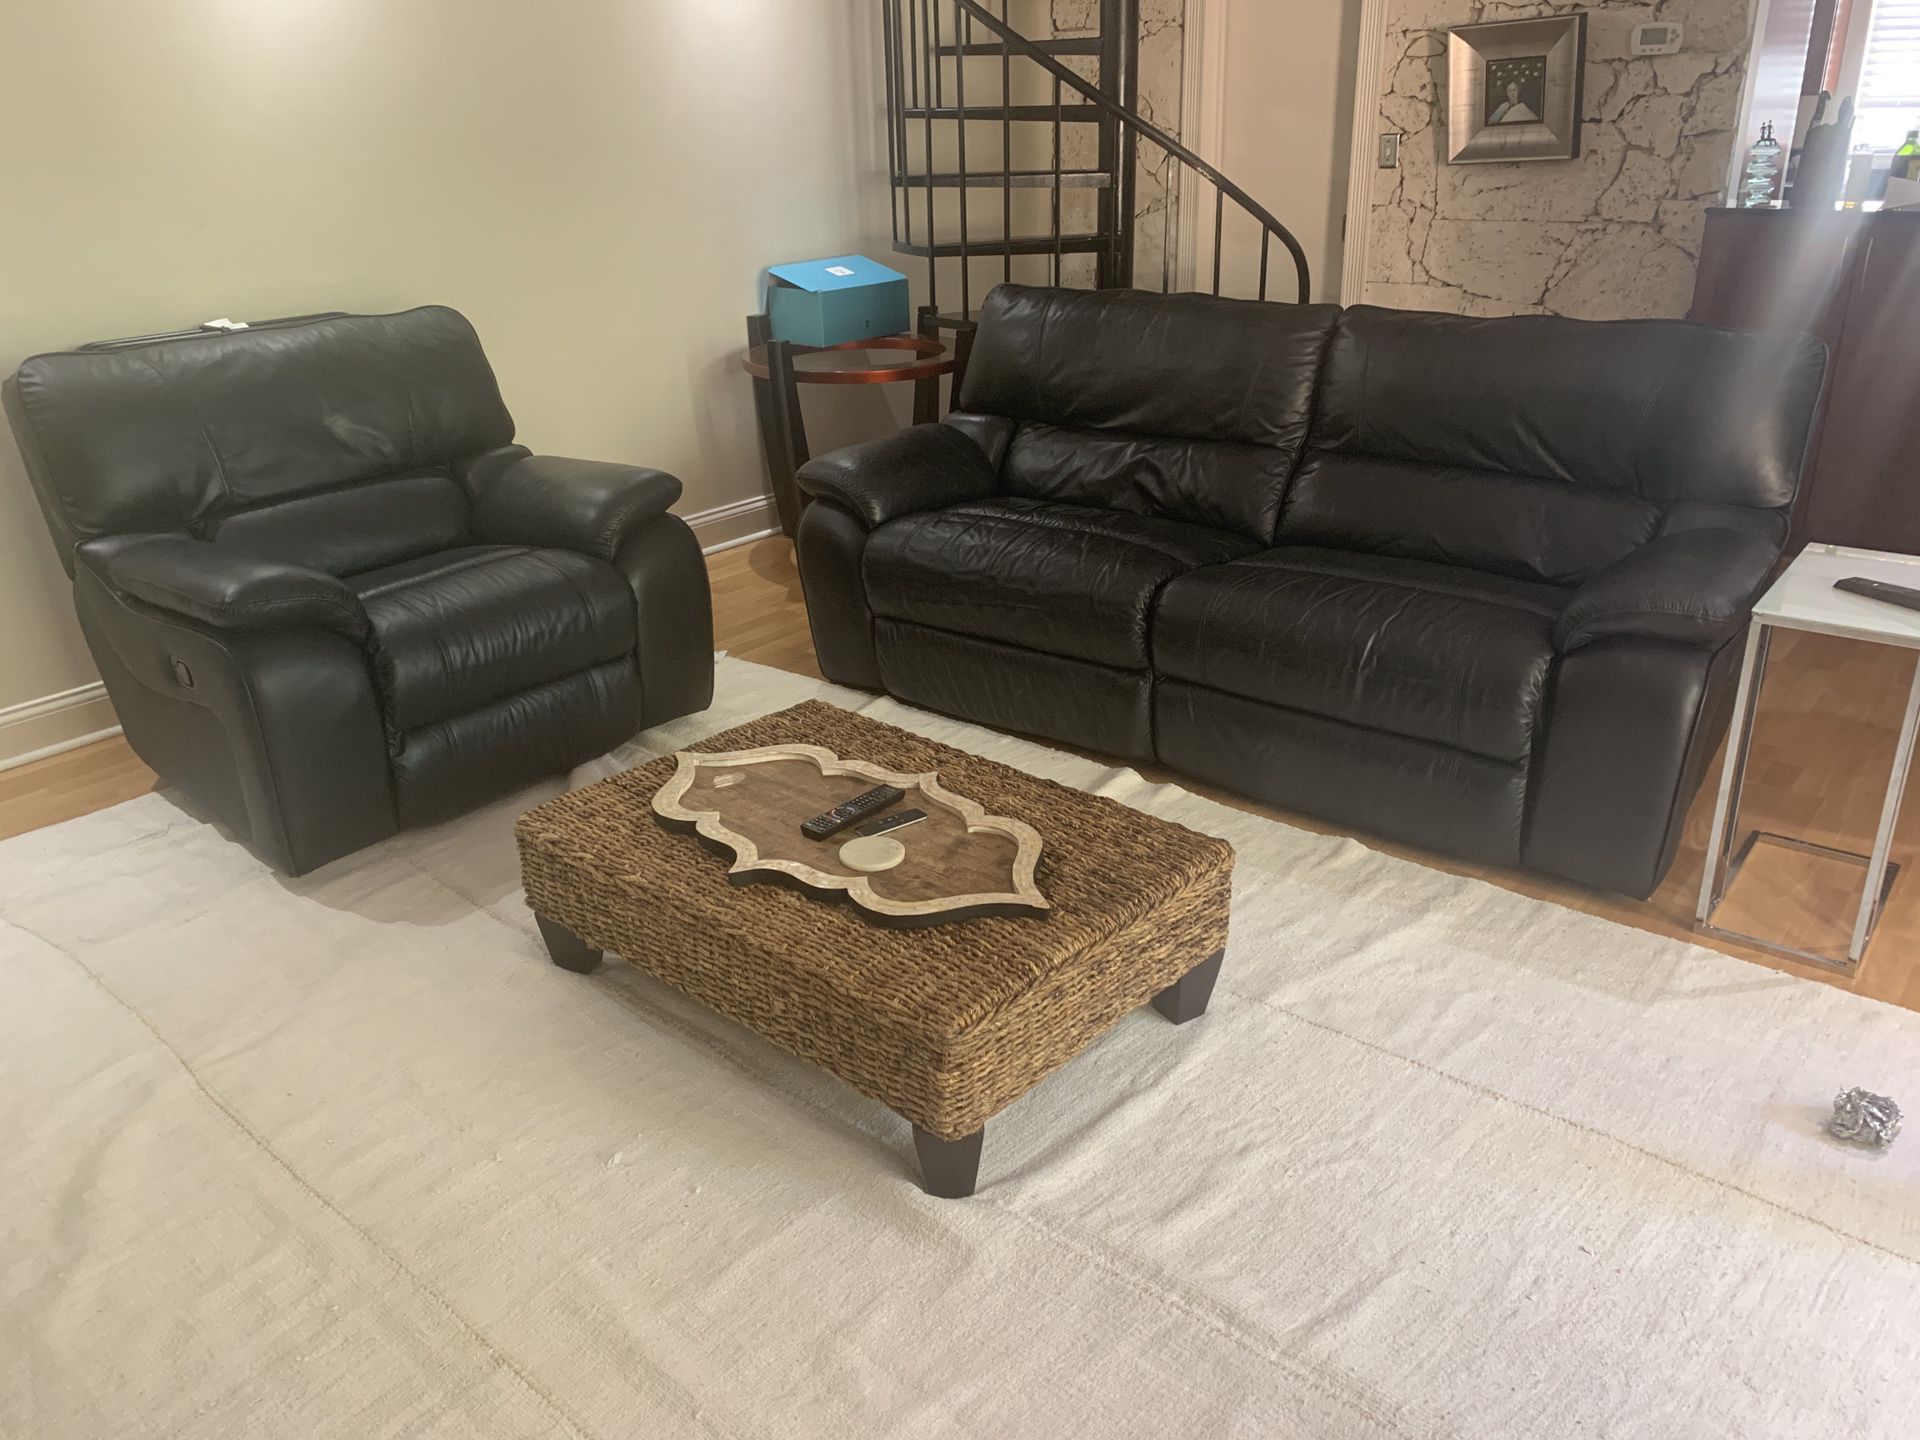 Black Leather Reclining Sofa and Chair available 12/24 +